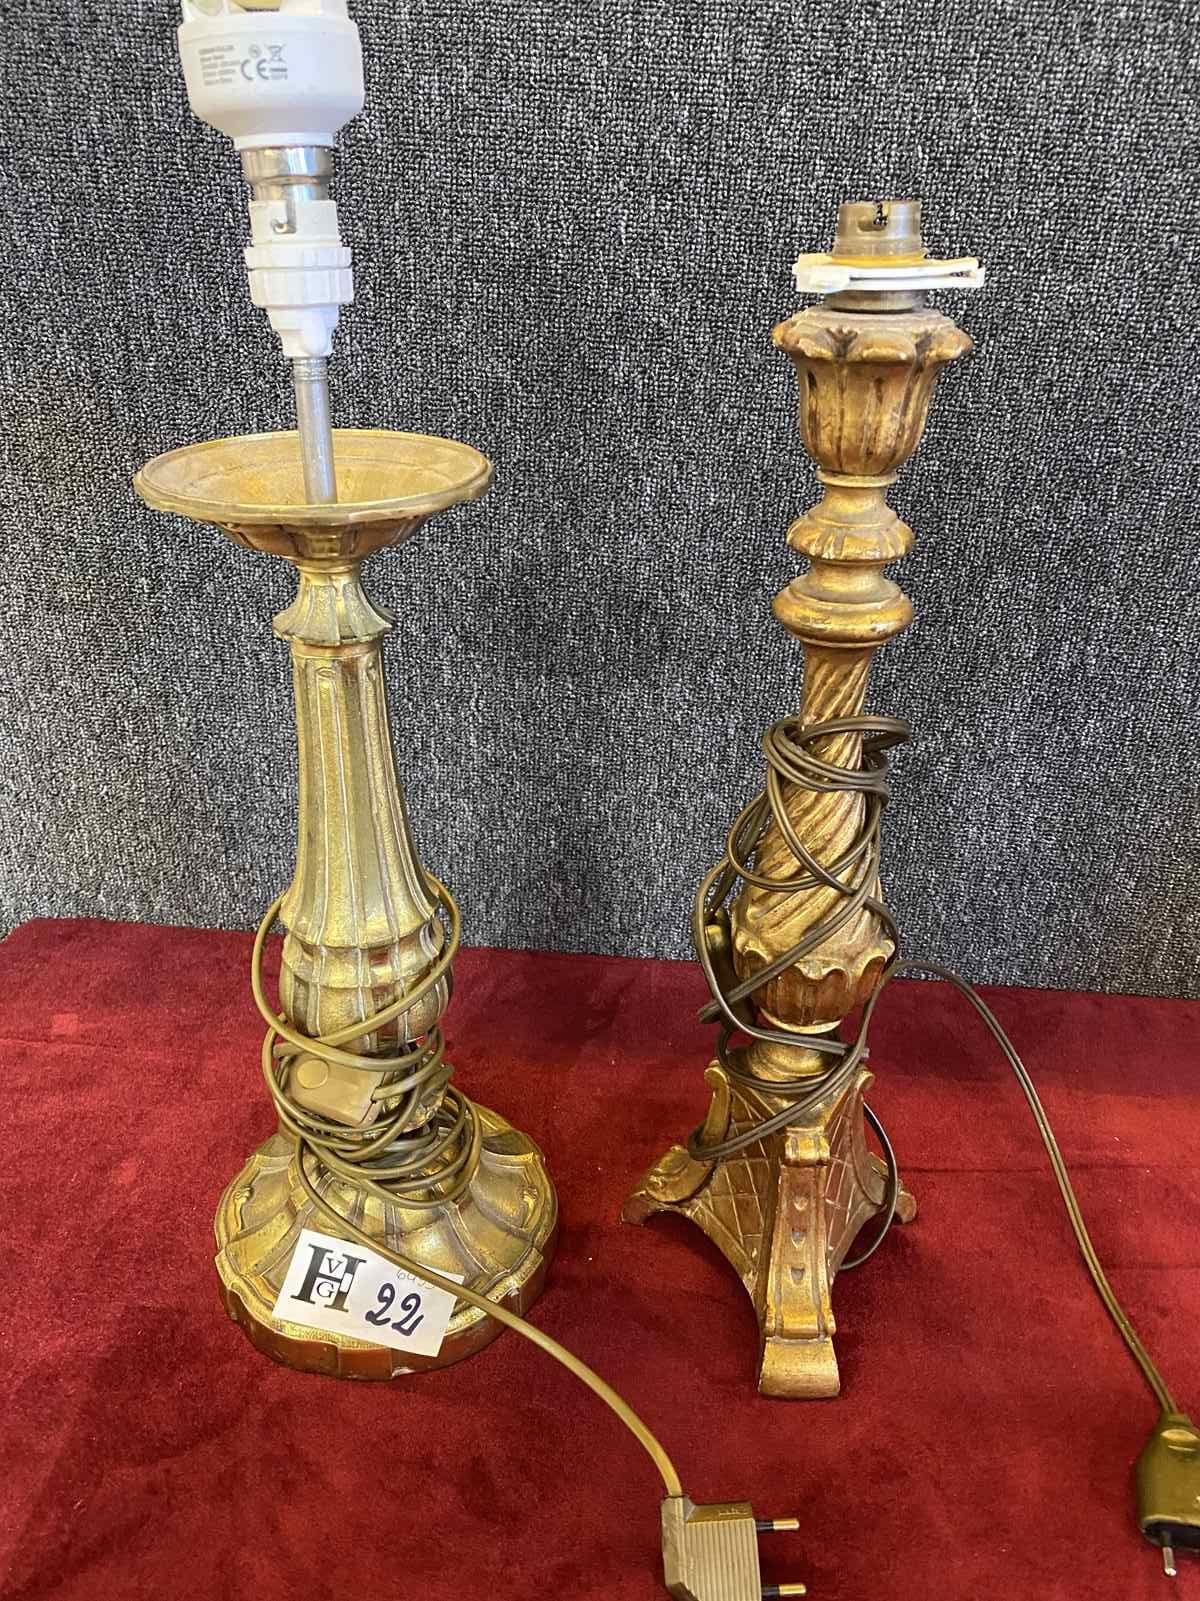 Mise à prix 20 € 2 Lamp bases - one in bronze and one in gilded wood